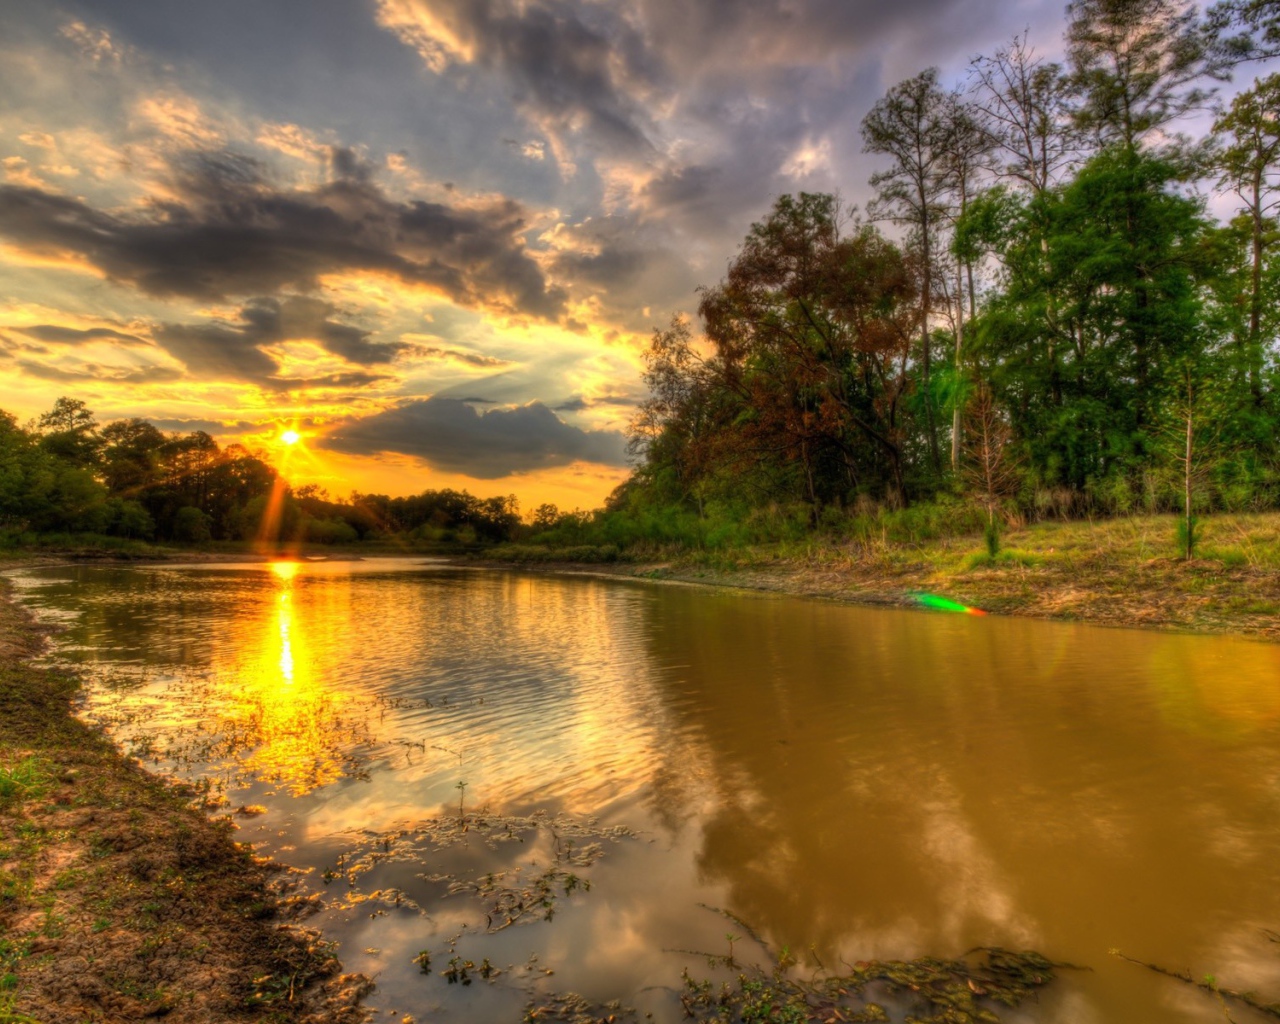 The river in Texas